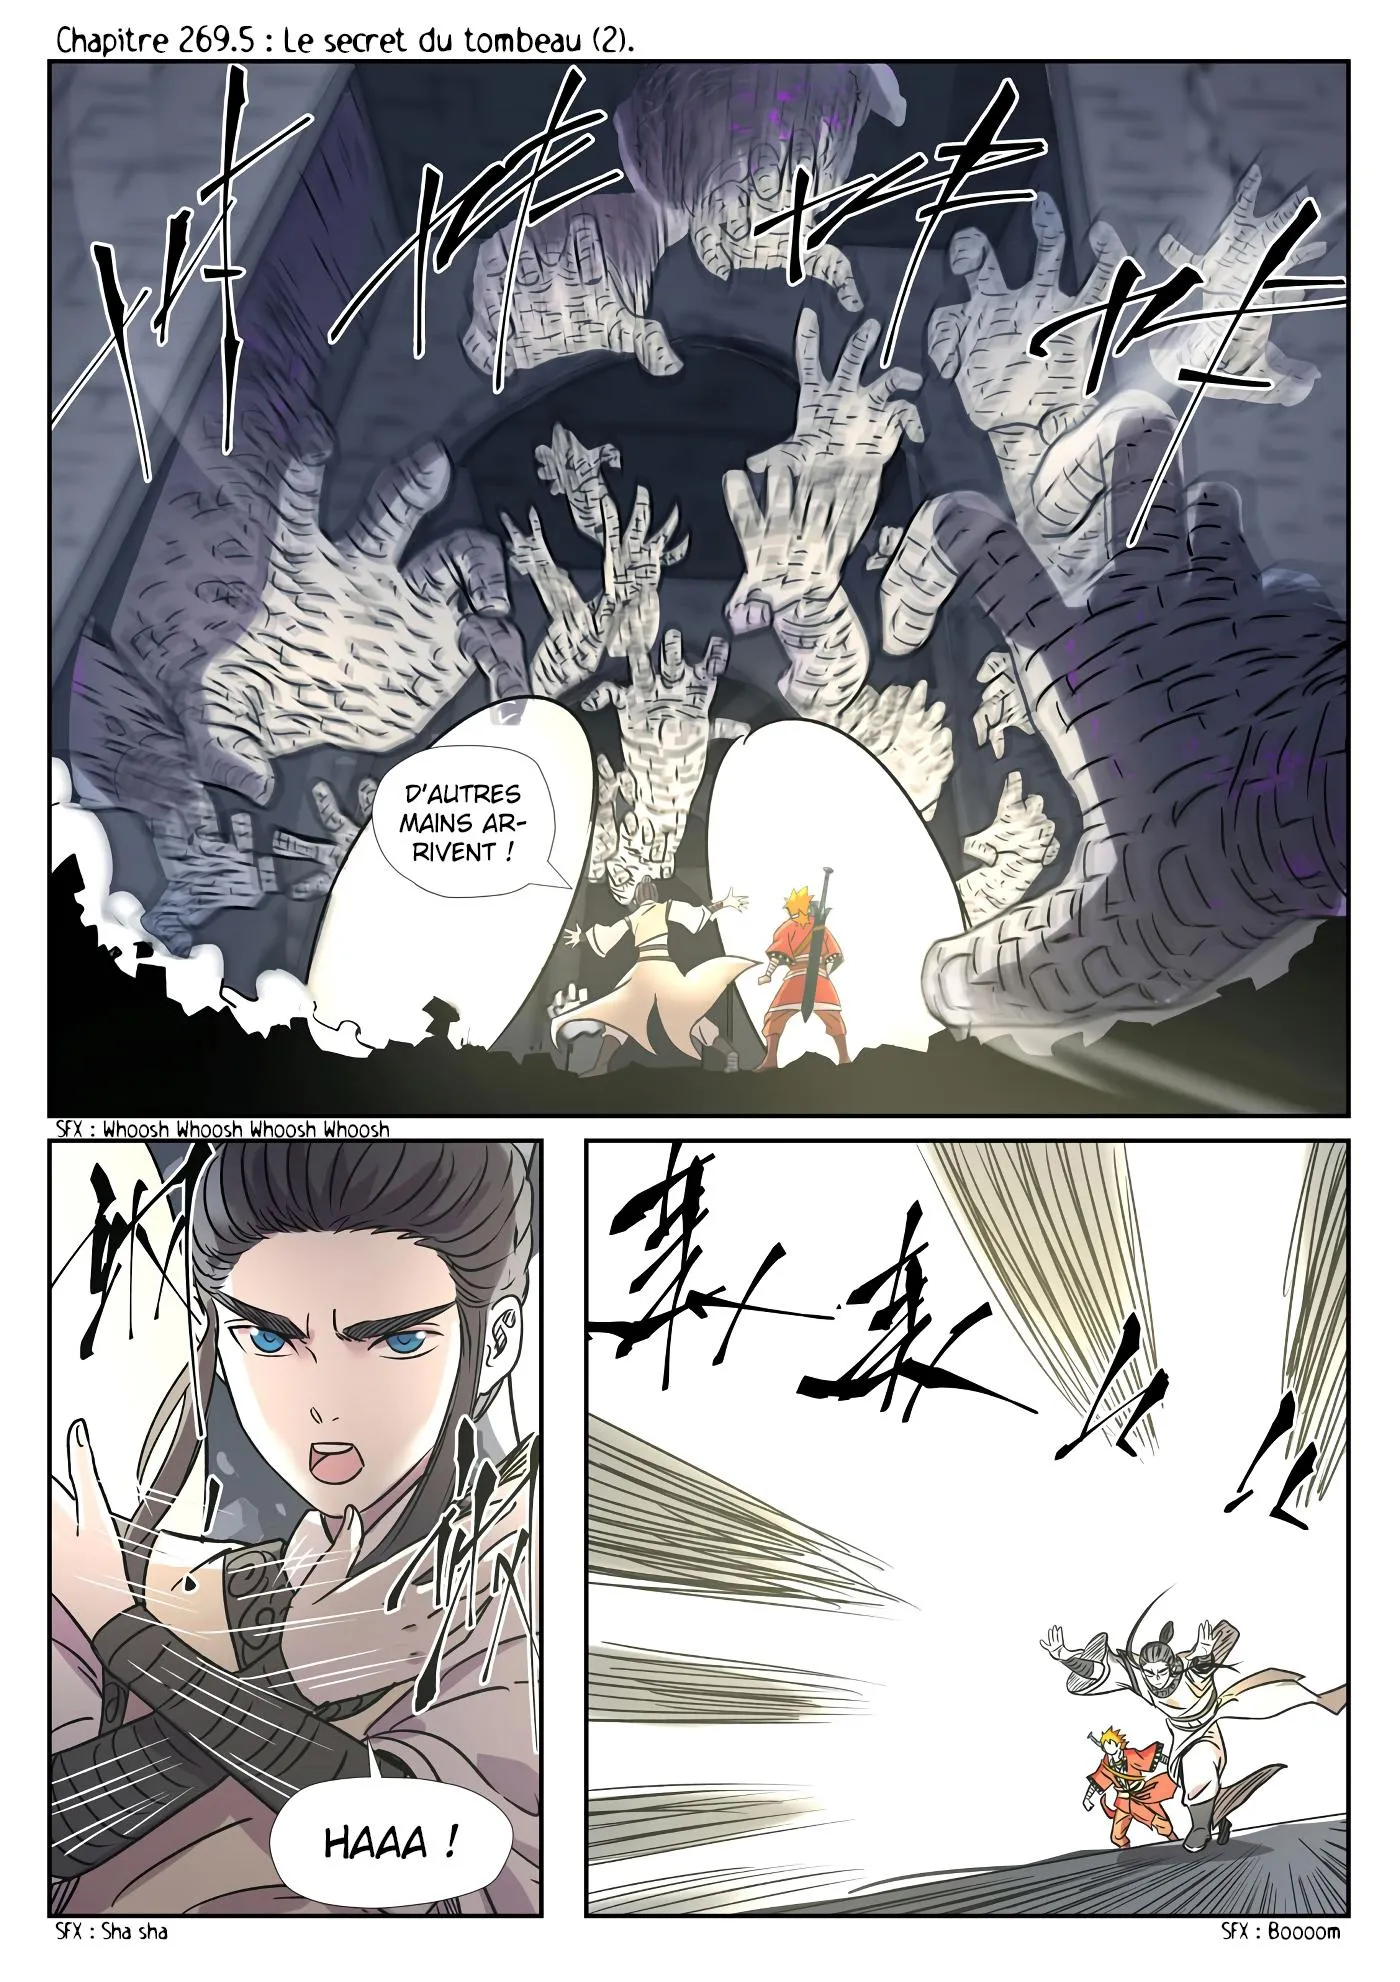 Tales Of Demons And Gods: Chapter chapitre-269.5 - Page 2